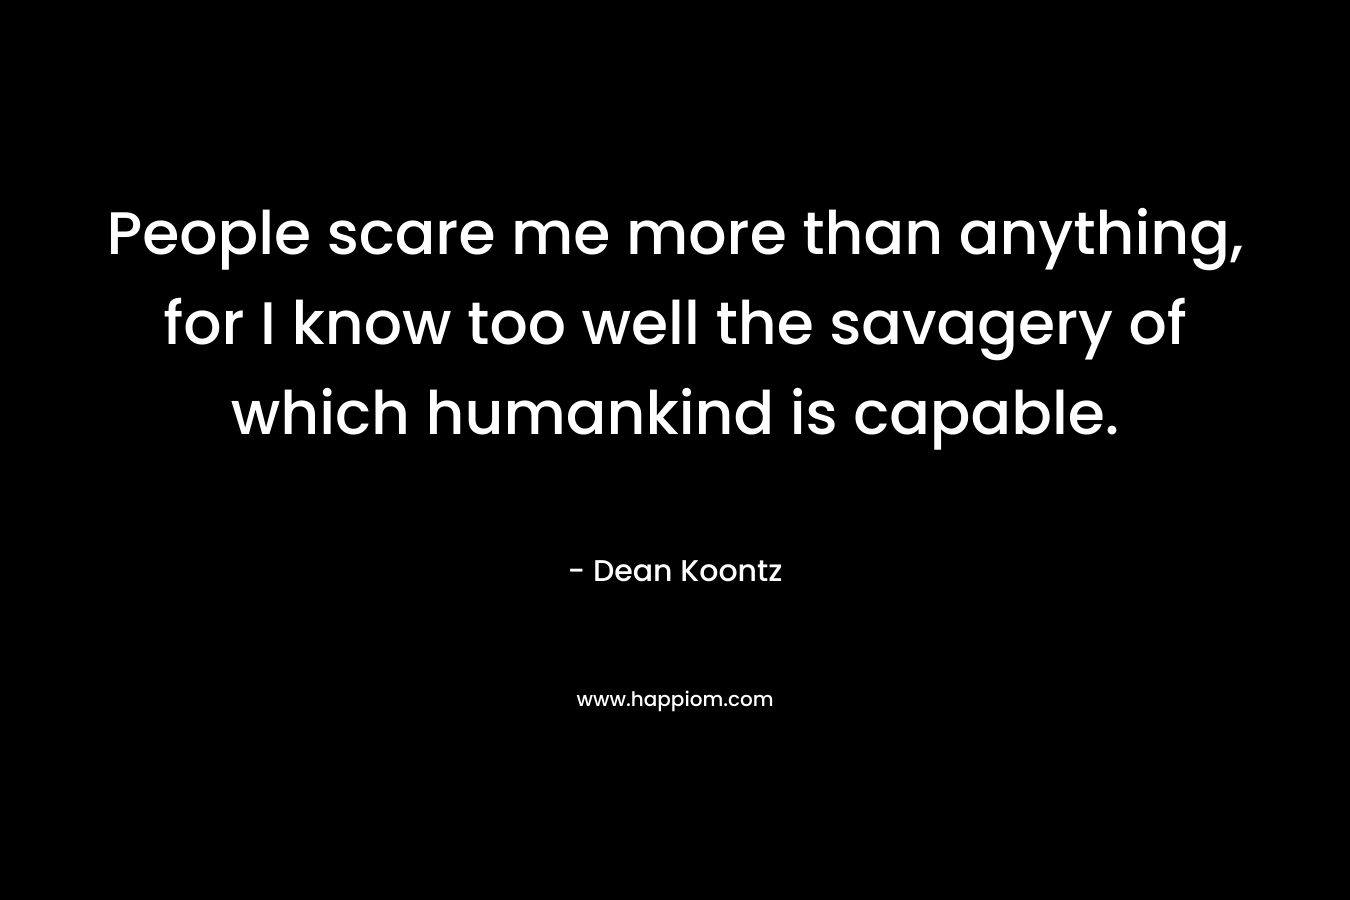 People scare me more than anything, for I know too well the savagery of which humankind is capable. – Dean Koontz